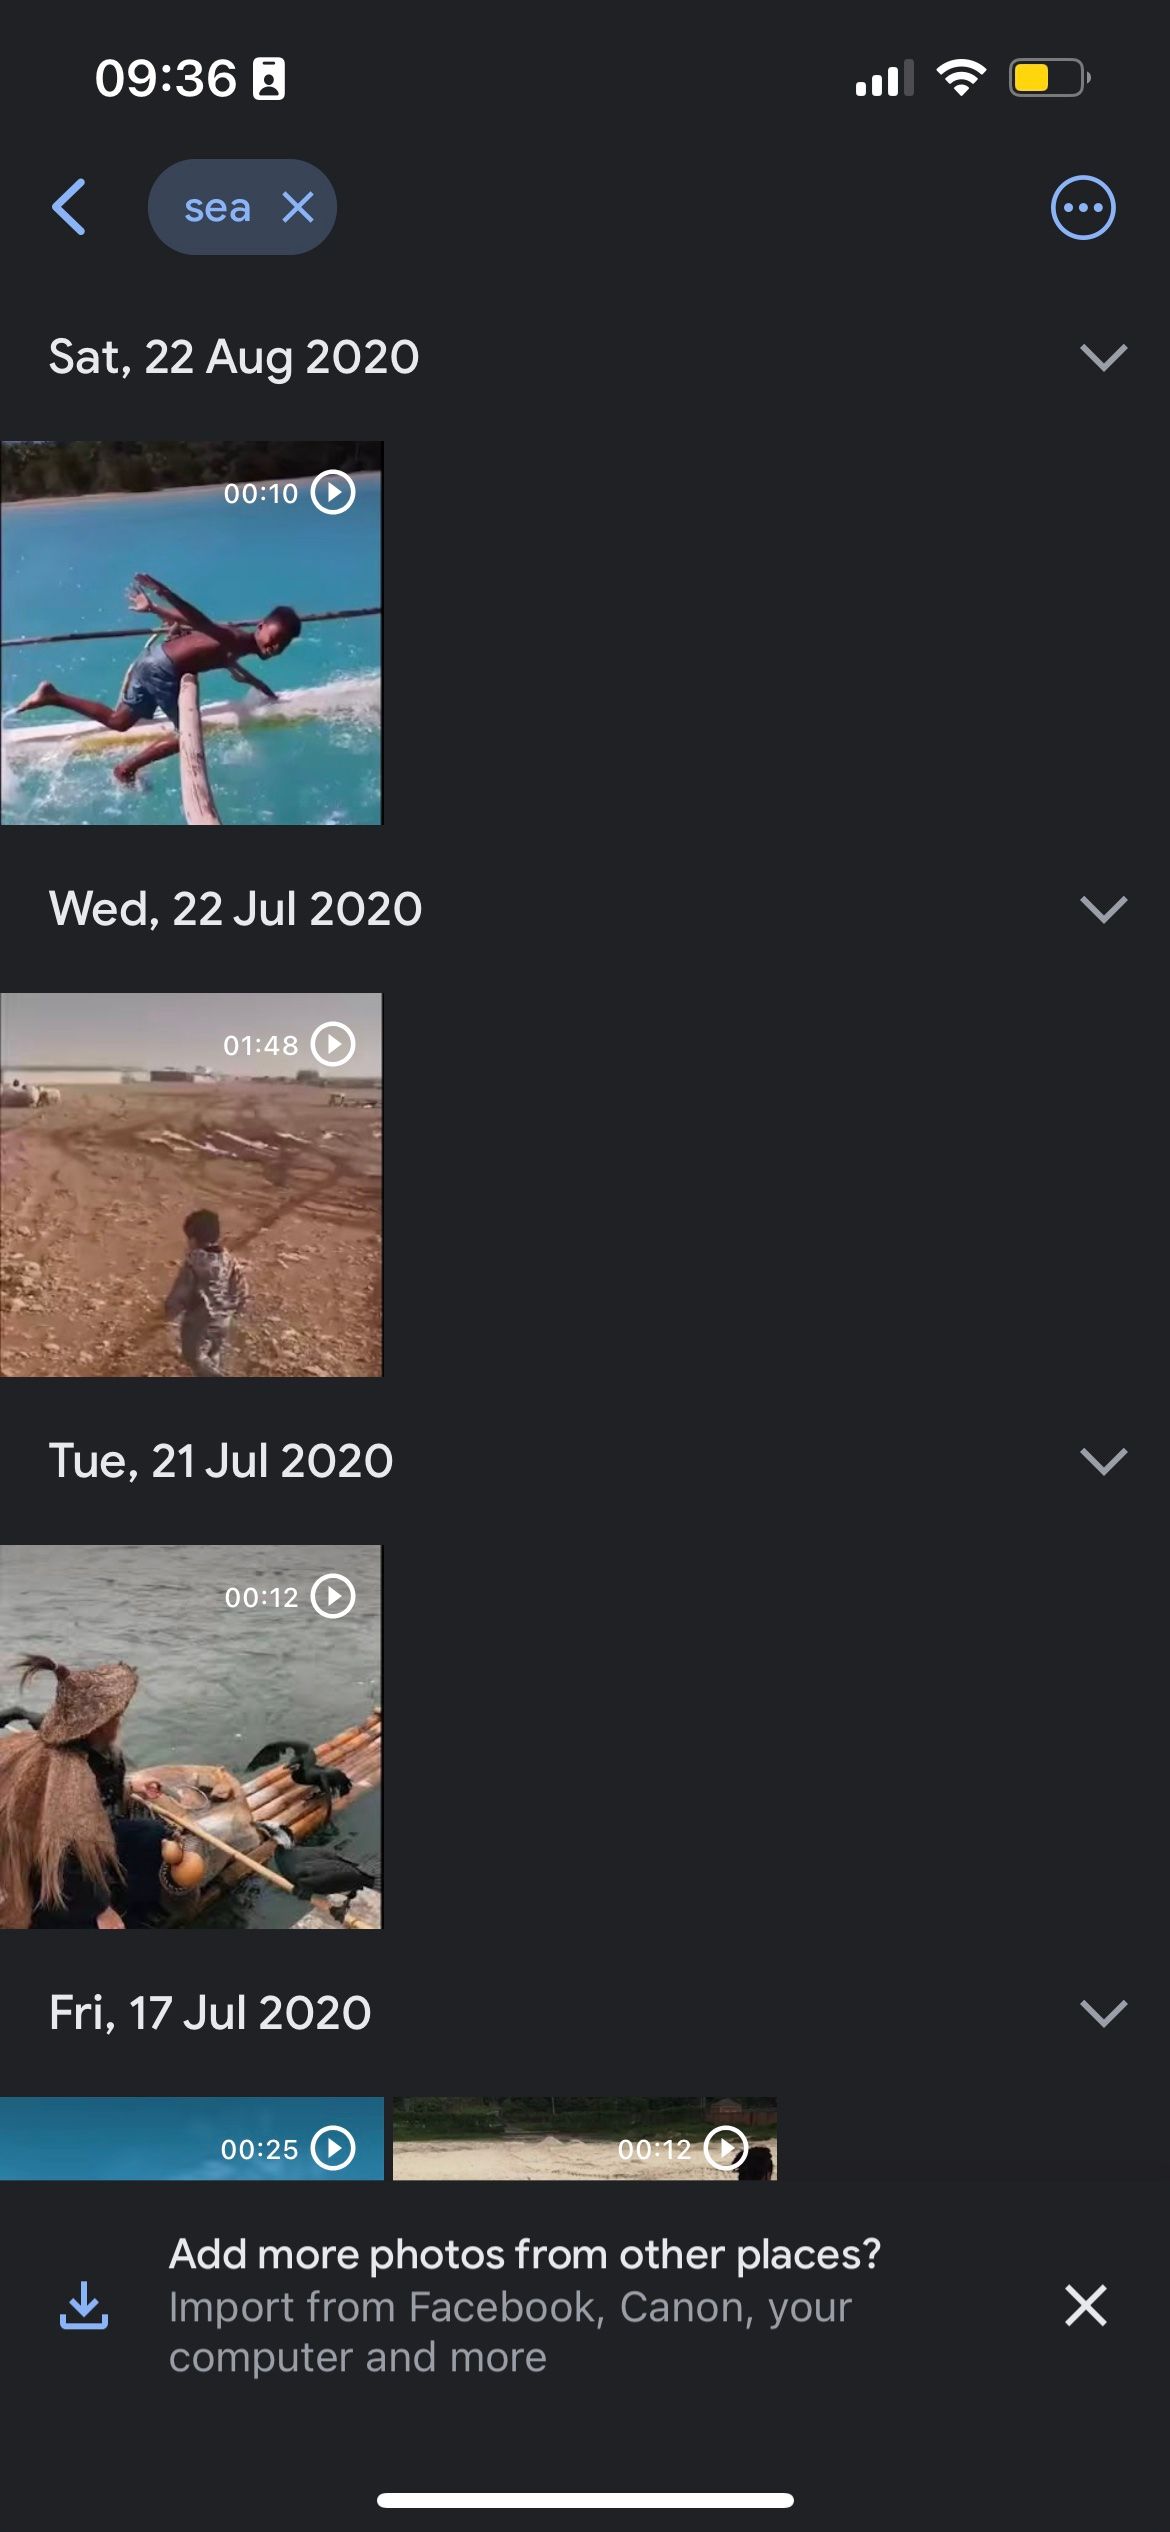 Results for 'sea' in Google Photos app